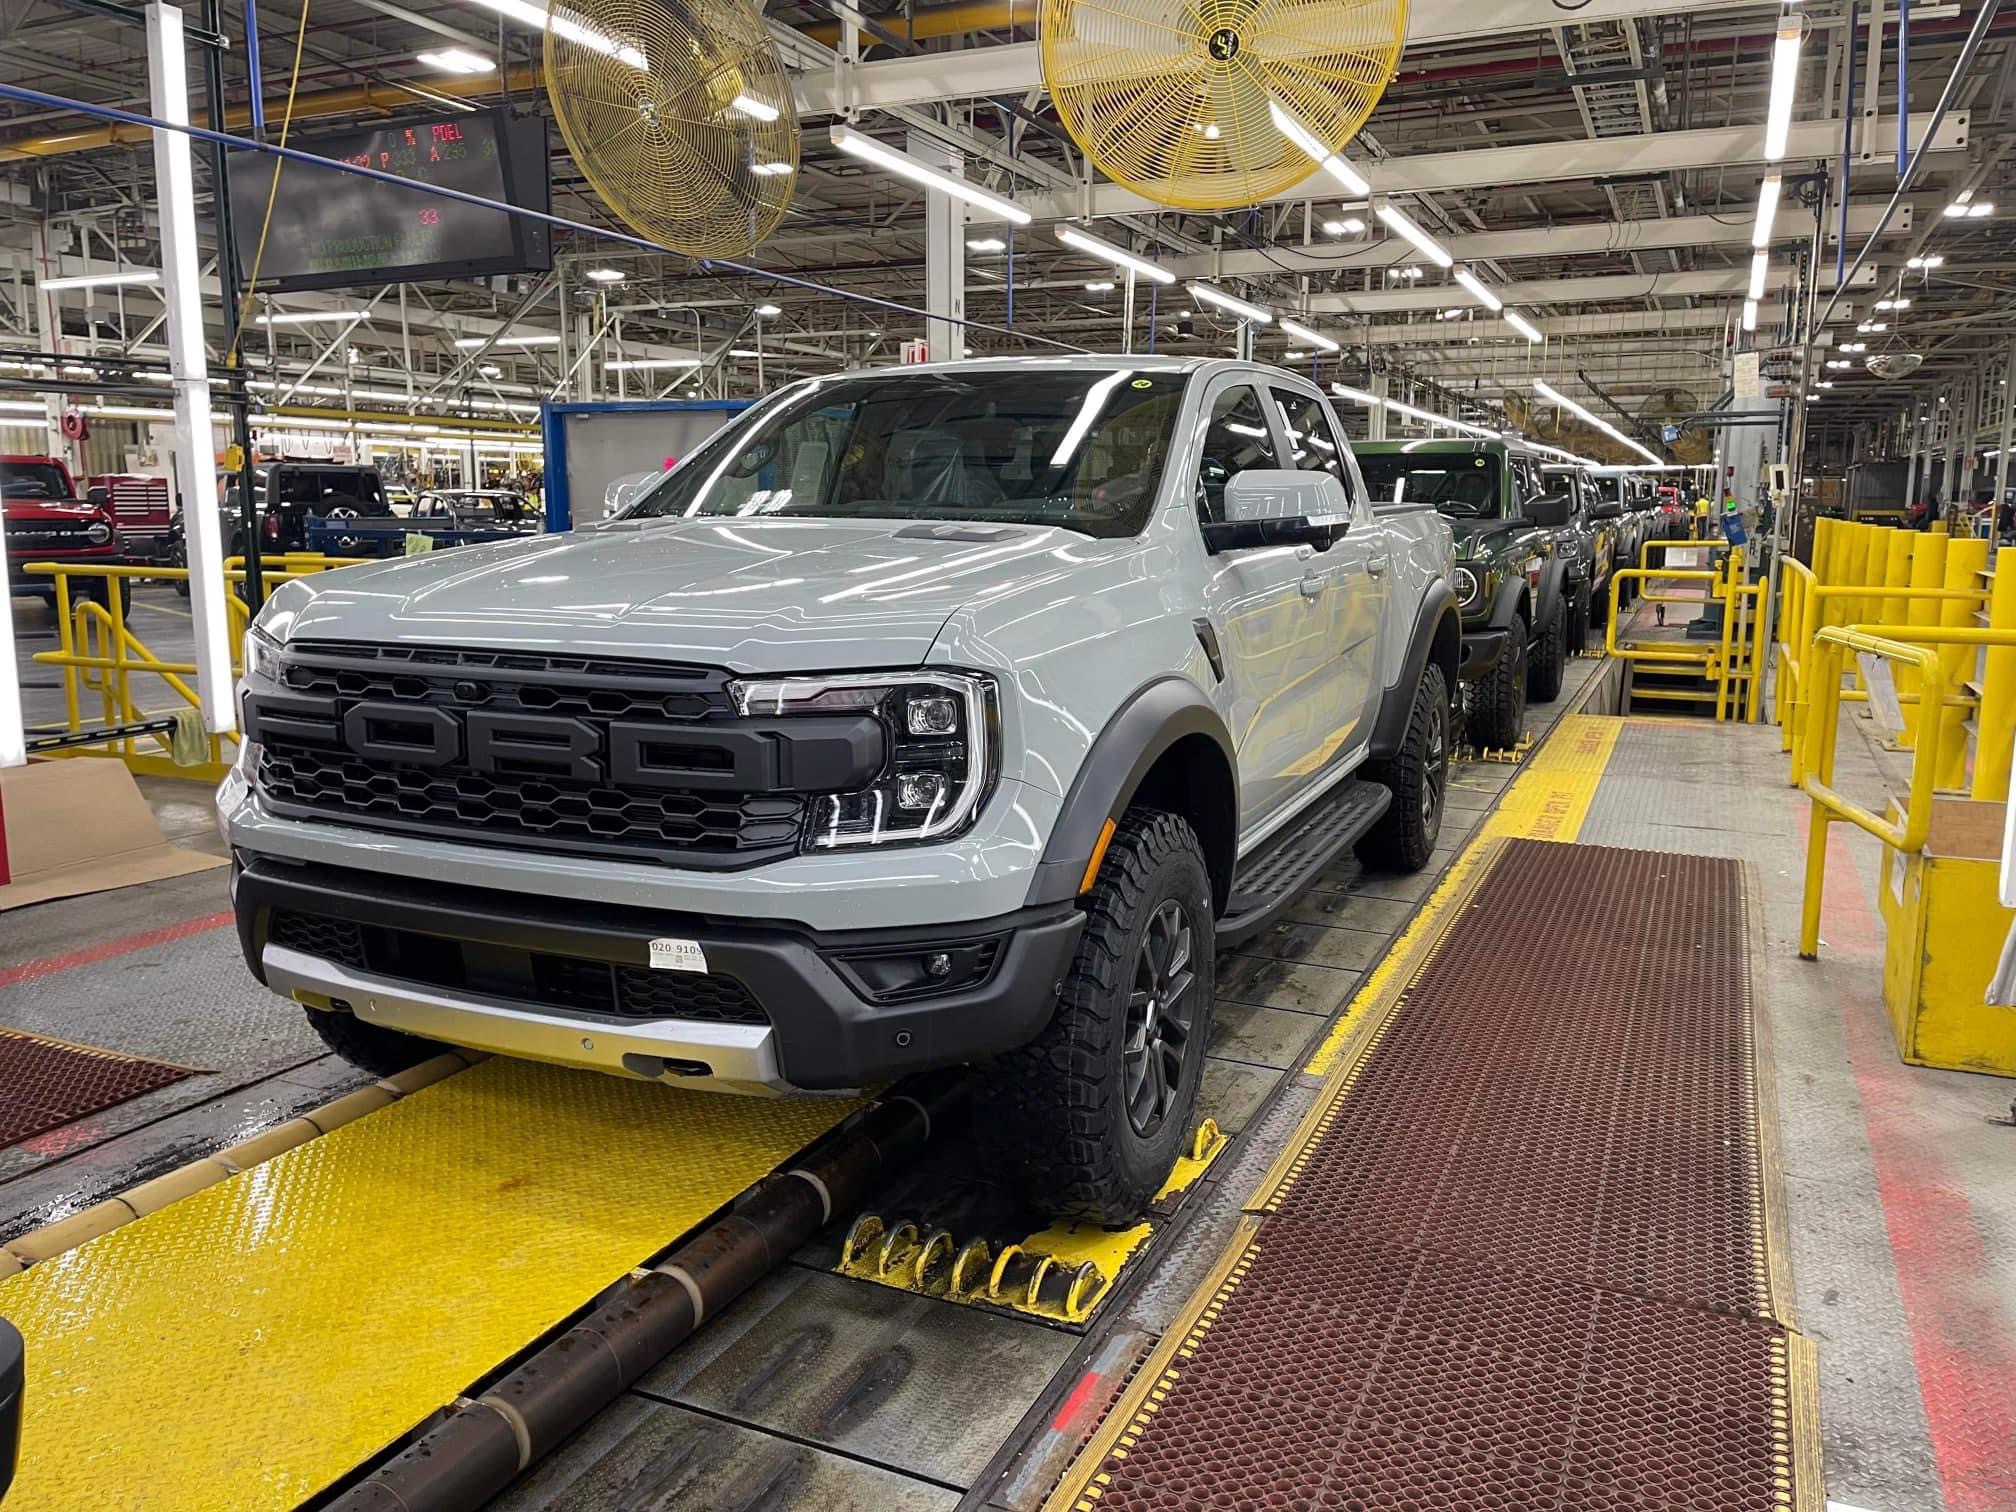 2024 Ranger Raptor first sighting on production line at MAP factory